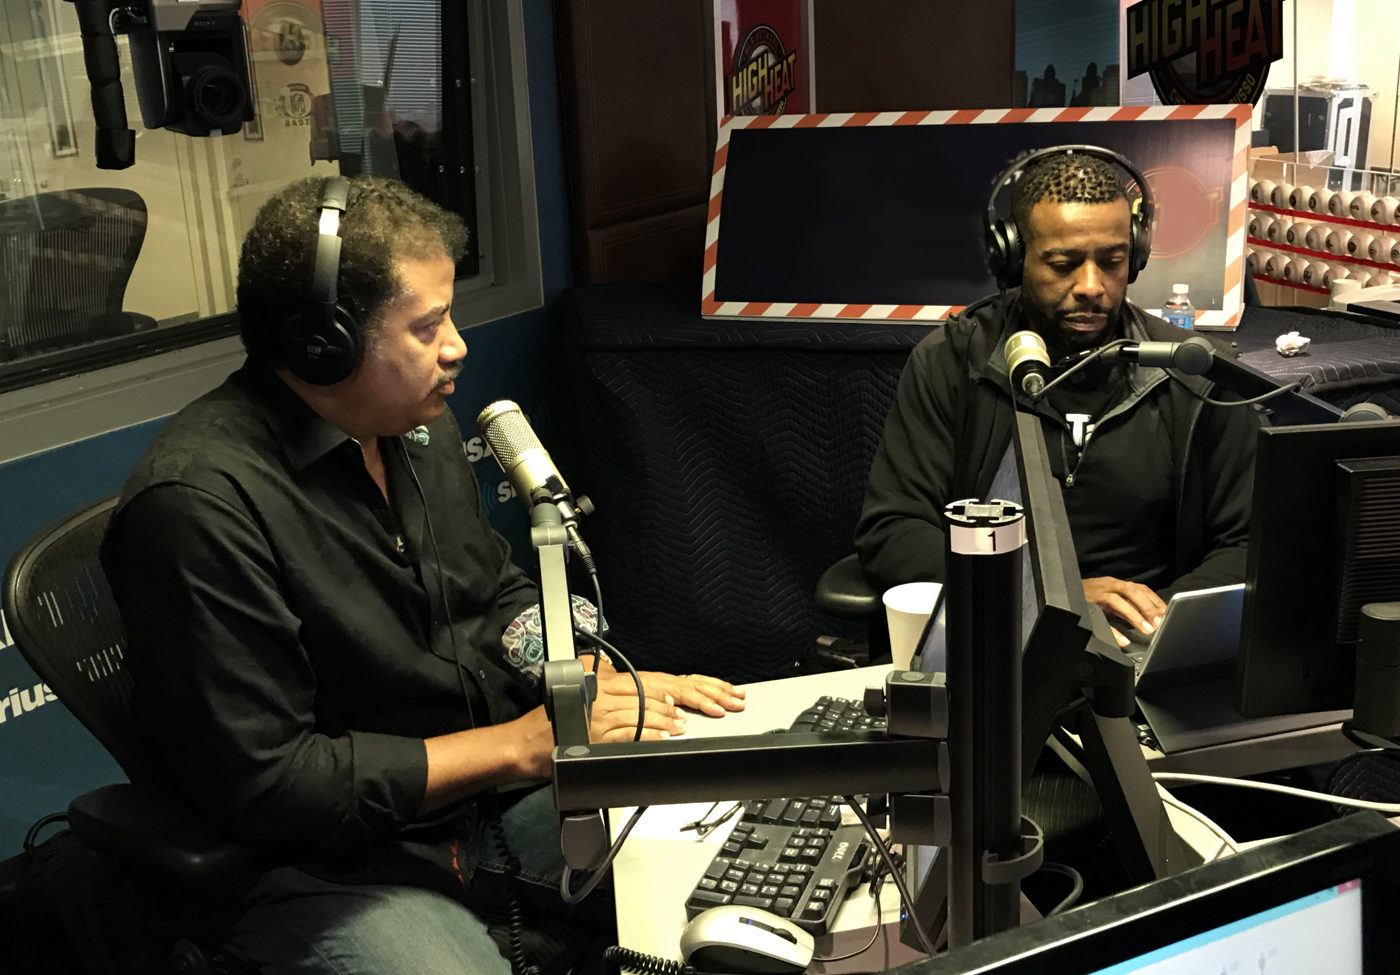 Ben Ratner's photo of Neil deGrasse Tyson and Chuck Nice in the Sirius XM studio.